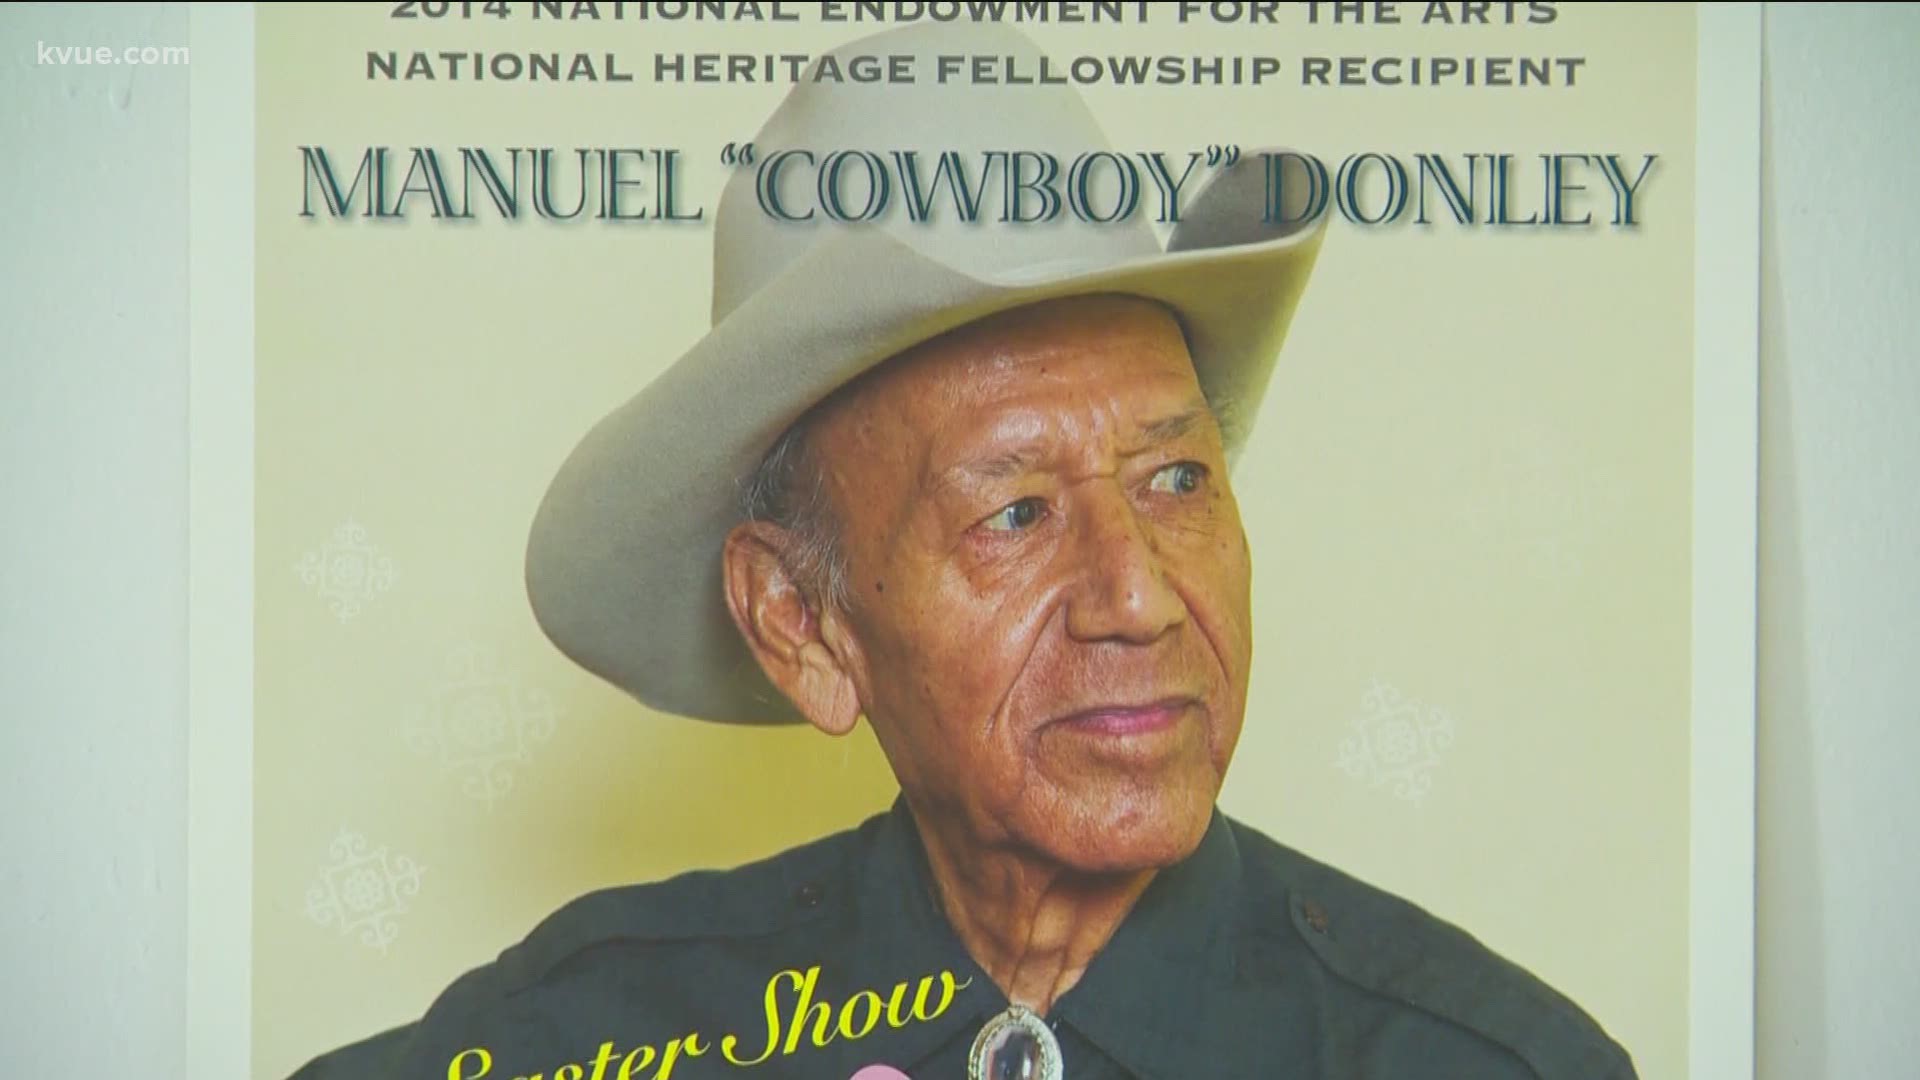 Manuel "Cowboy" Donley, also known as "Godfather of Tejano music” has died at 92 years old.